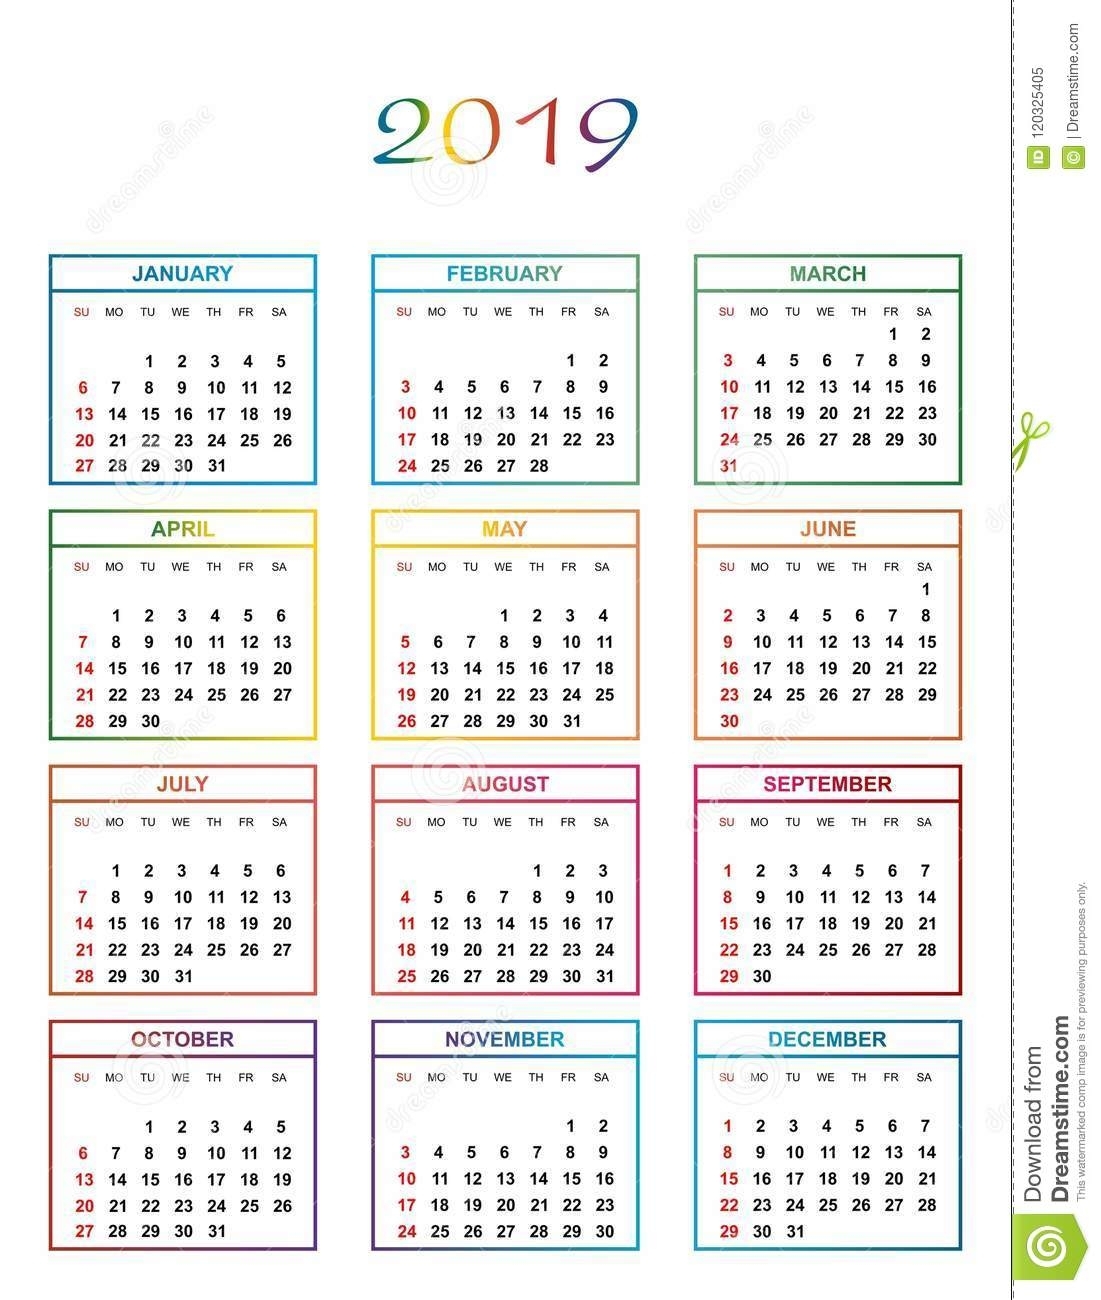 Simple Color Calendar For The Year 2019 With Name Of Day